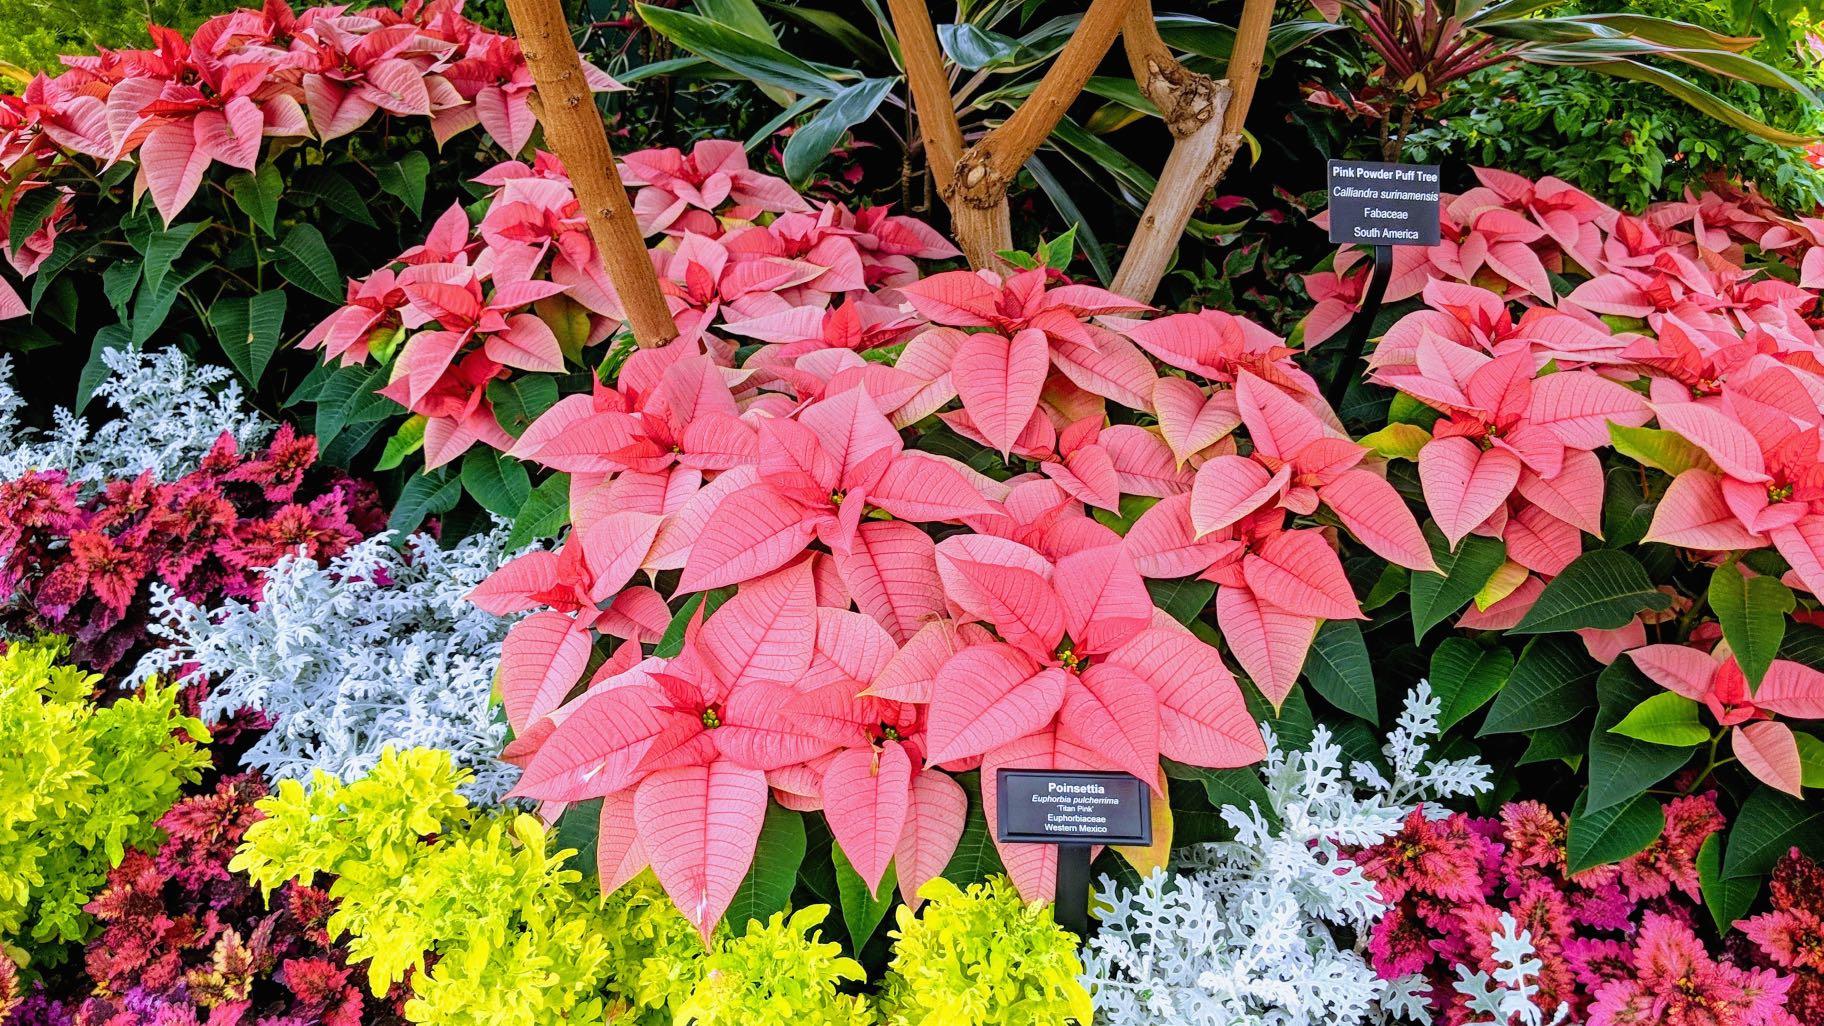 Lincoln Park Conservatory's winter flower show features colorful poinsettias. (Courtesy of Chicago Park District)